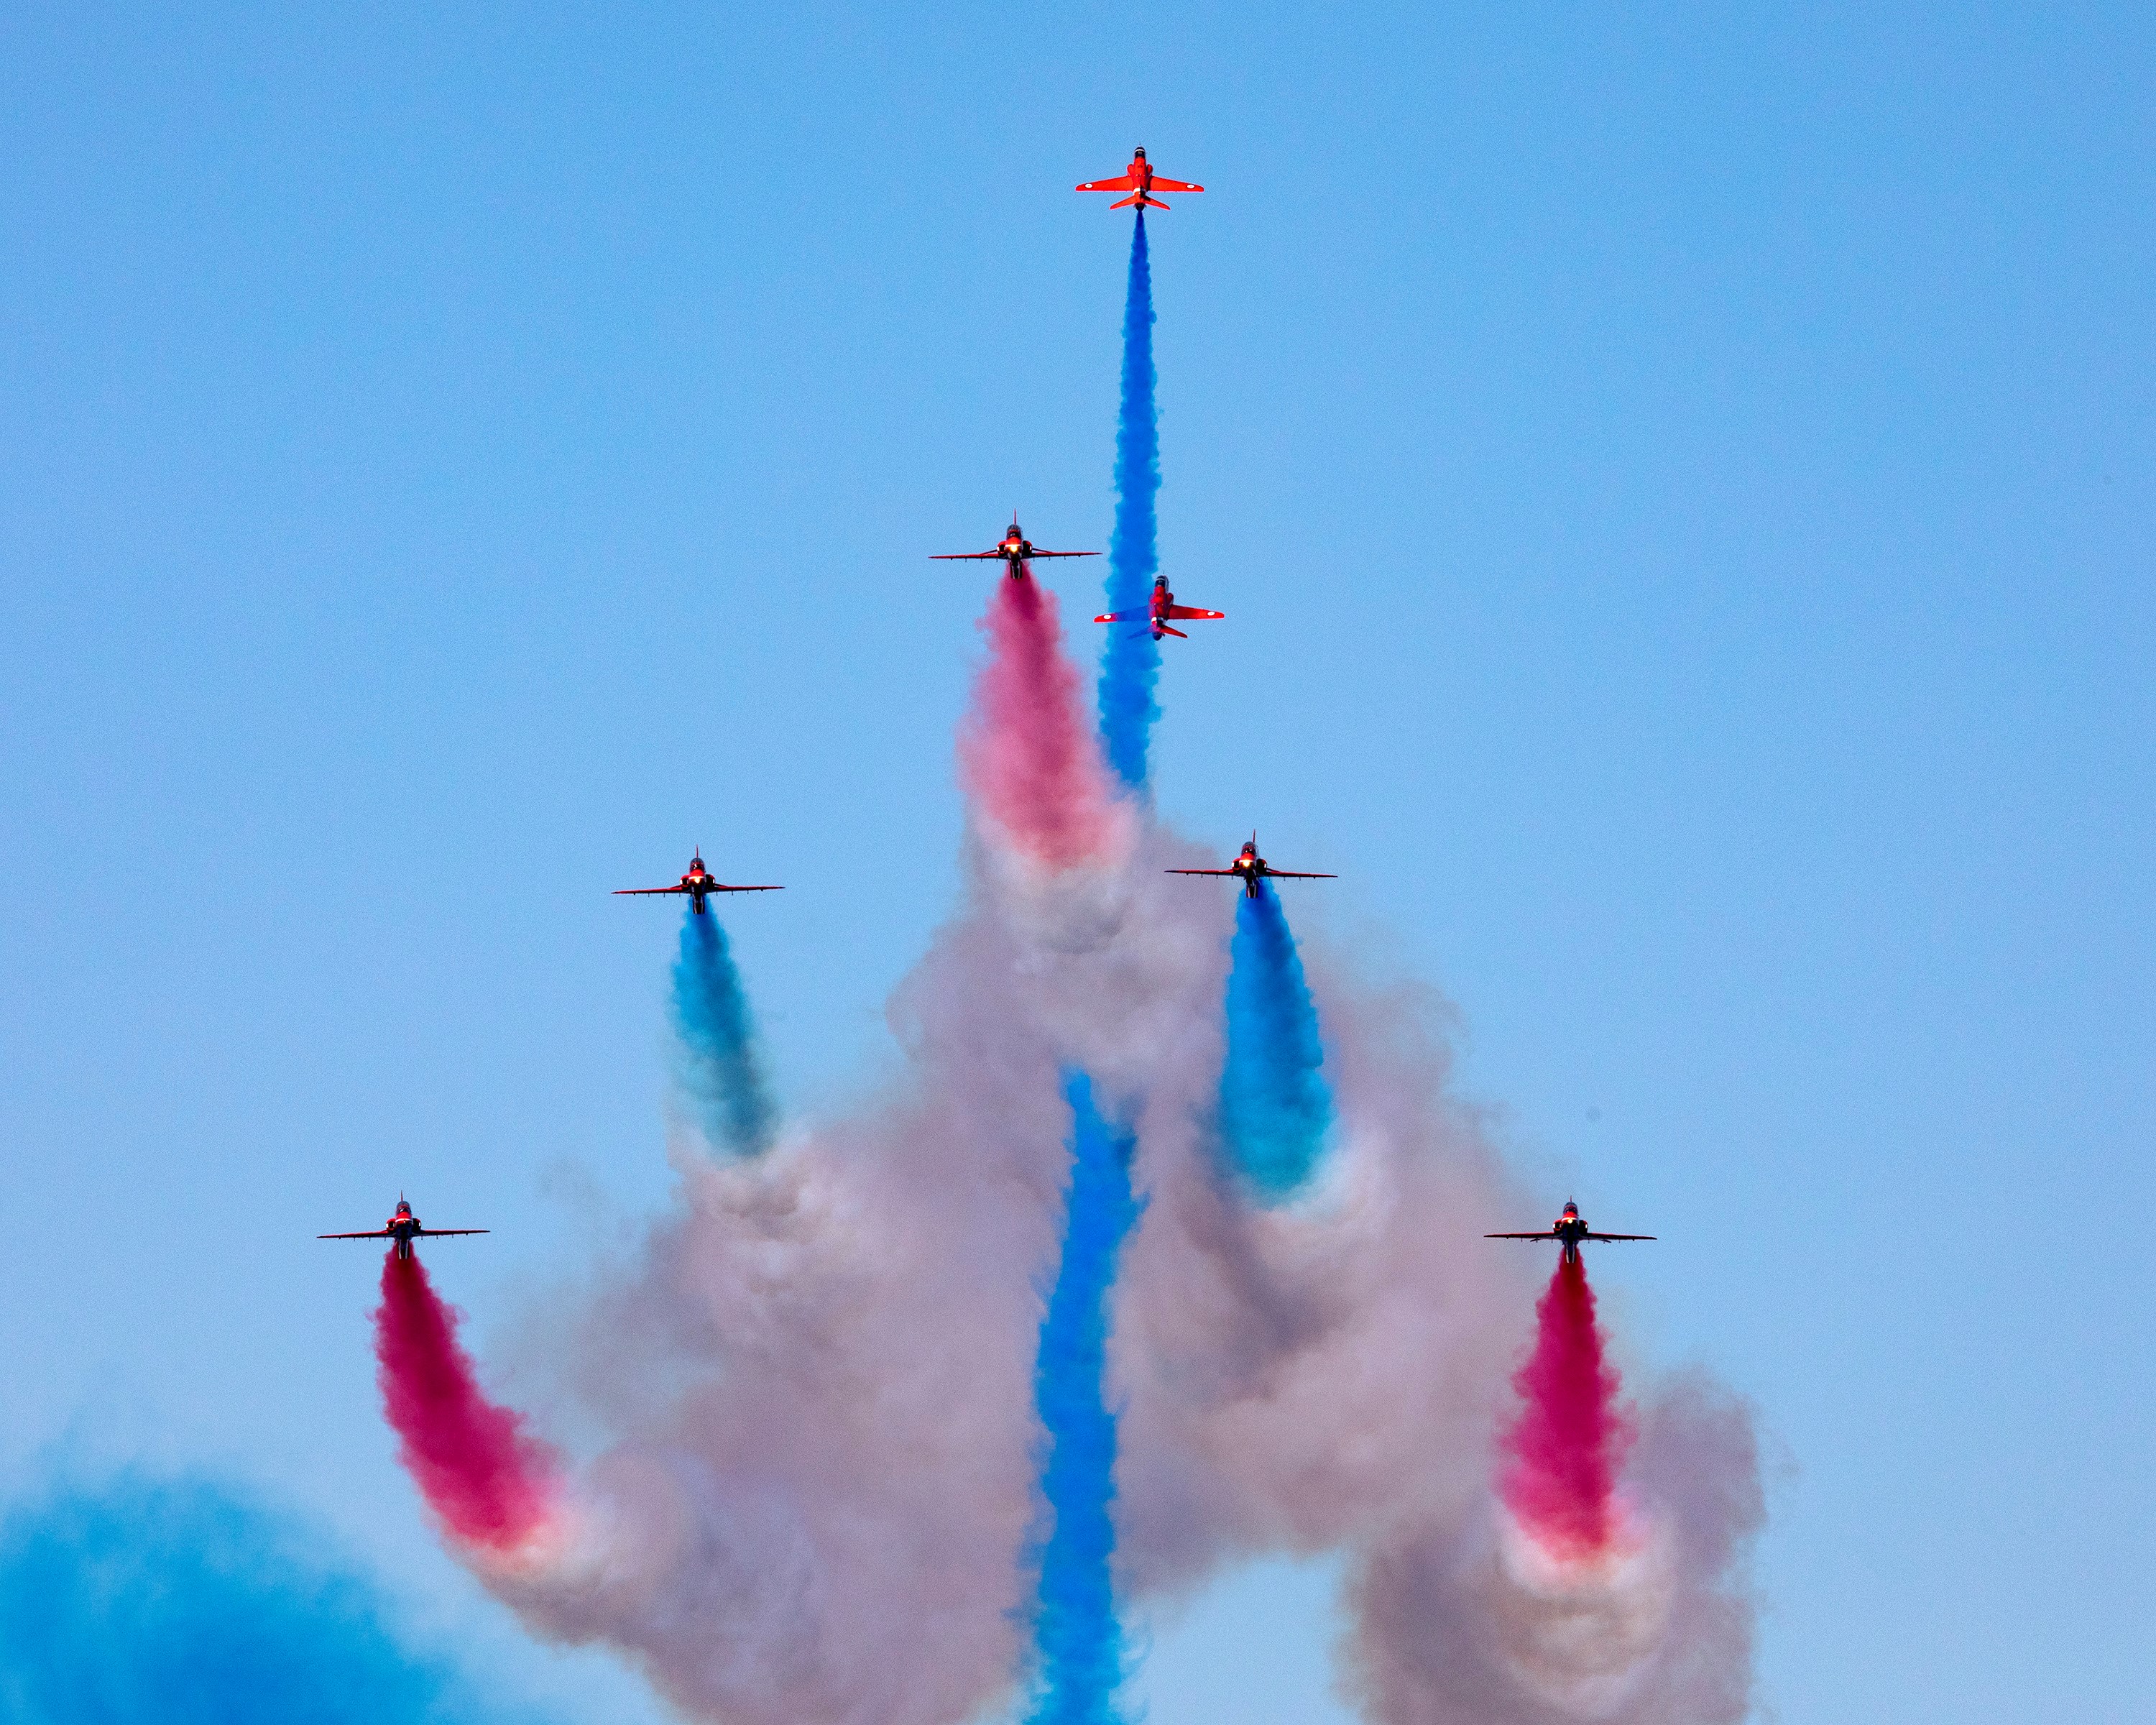 Image shows the Red Arrows performing in formation, with red, blue and white smoke trails. 